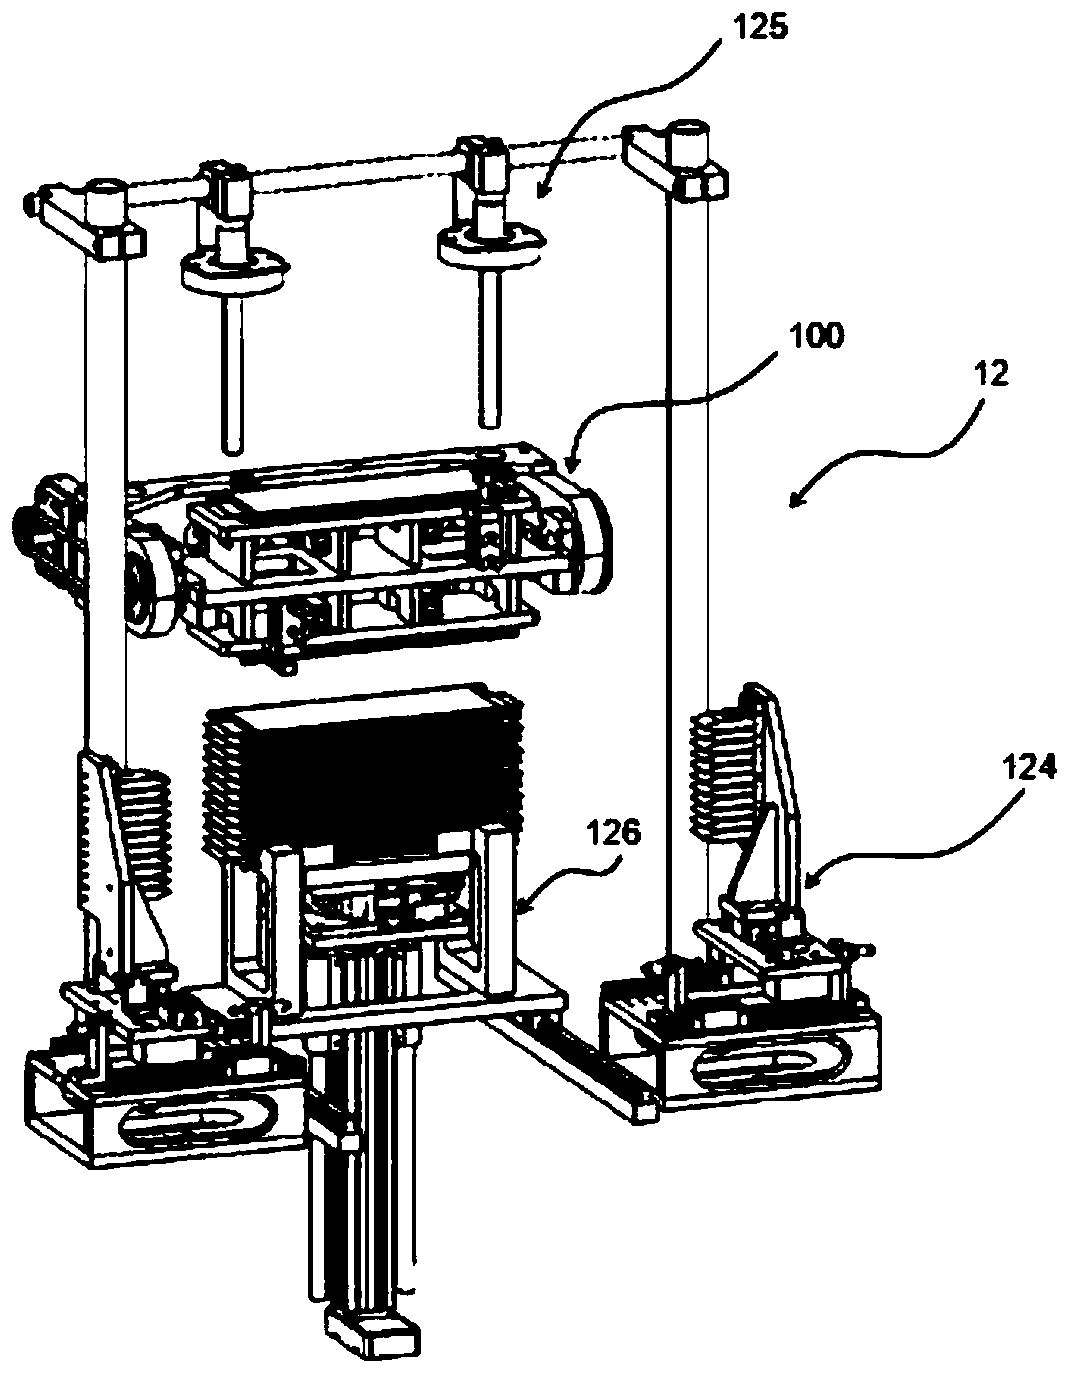 Cell stacking device